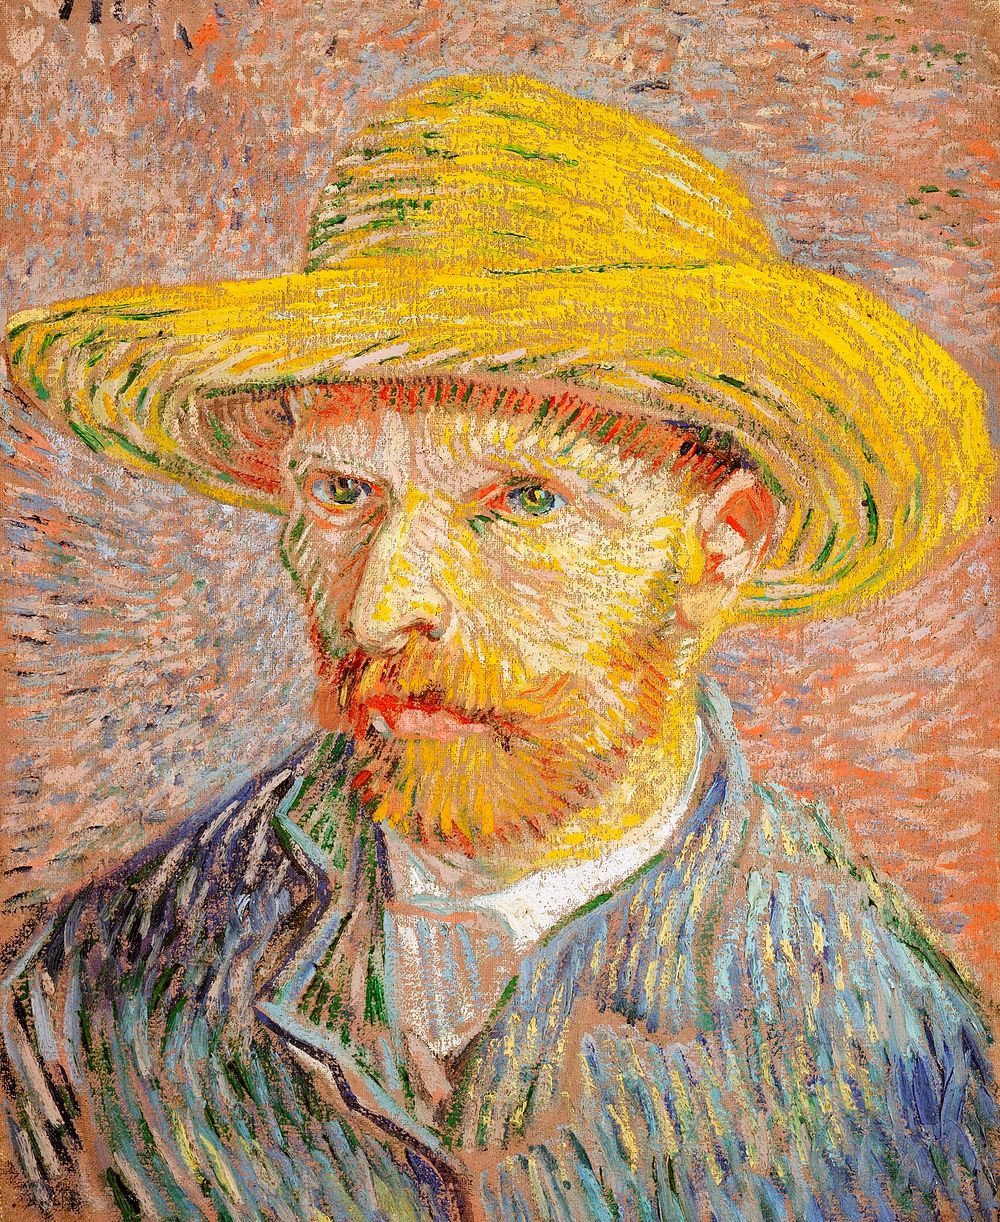 Self-Portrait with a Straw Hat (1887) by Vincent Van Gogh. Original from the MET Museum. Digitally enhanced by rawpixel.